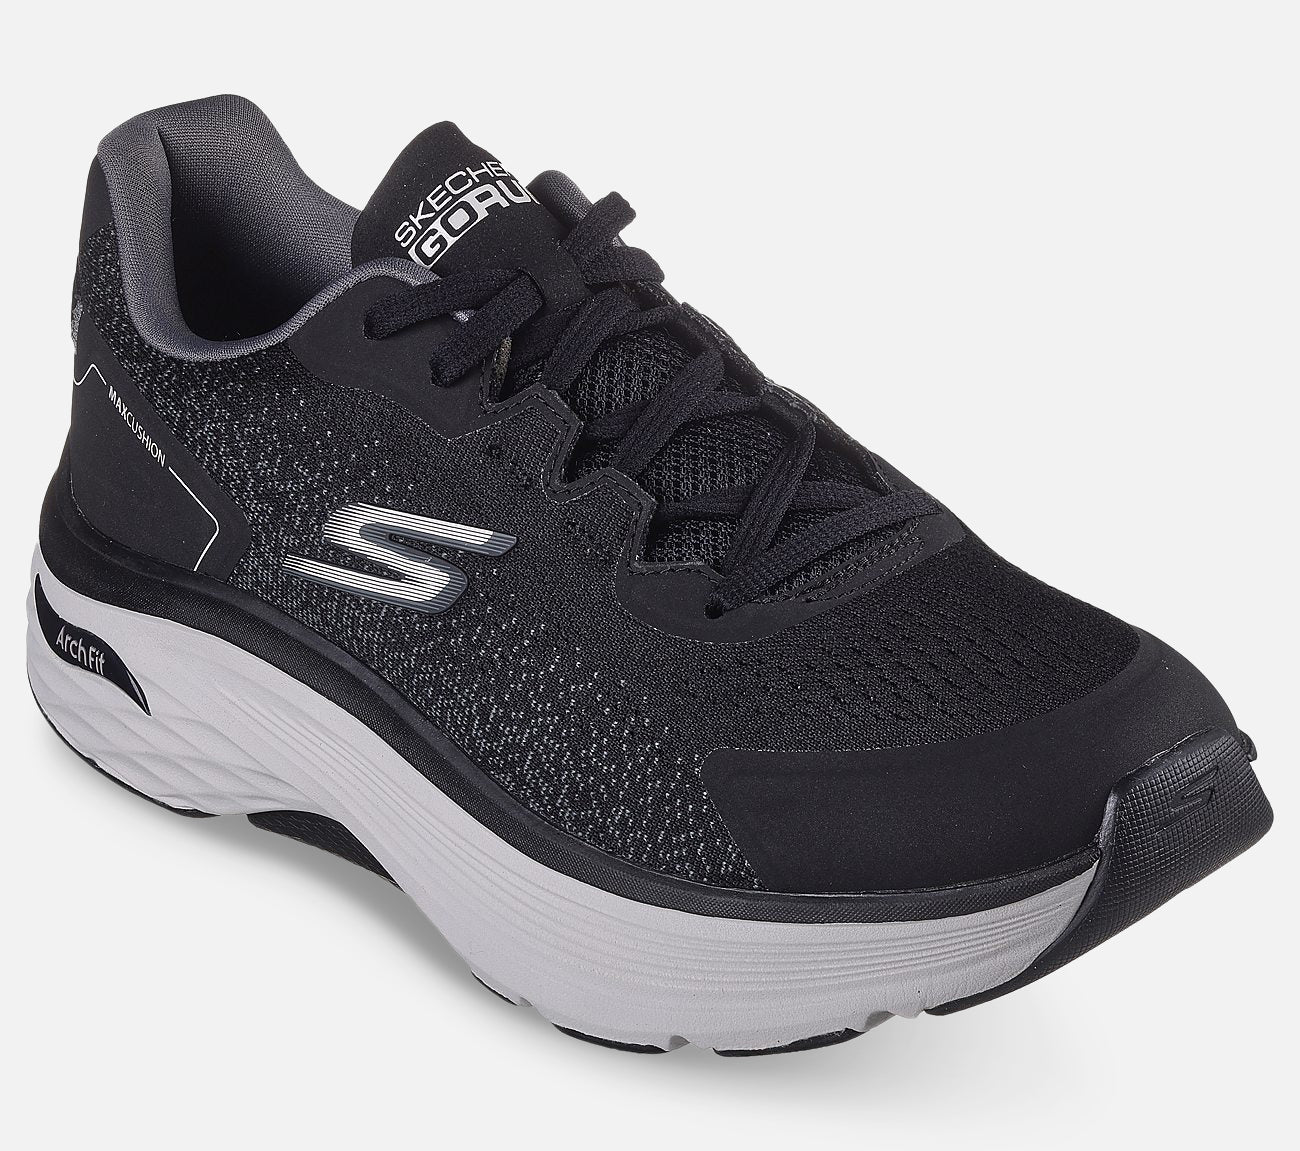 Max Cushioning Arch Fit - Apex Shoe Skechers